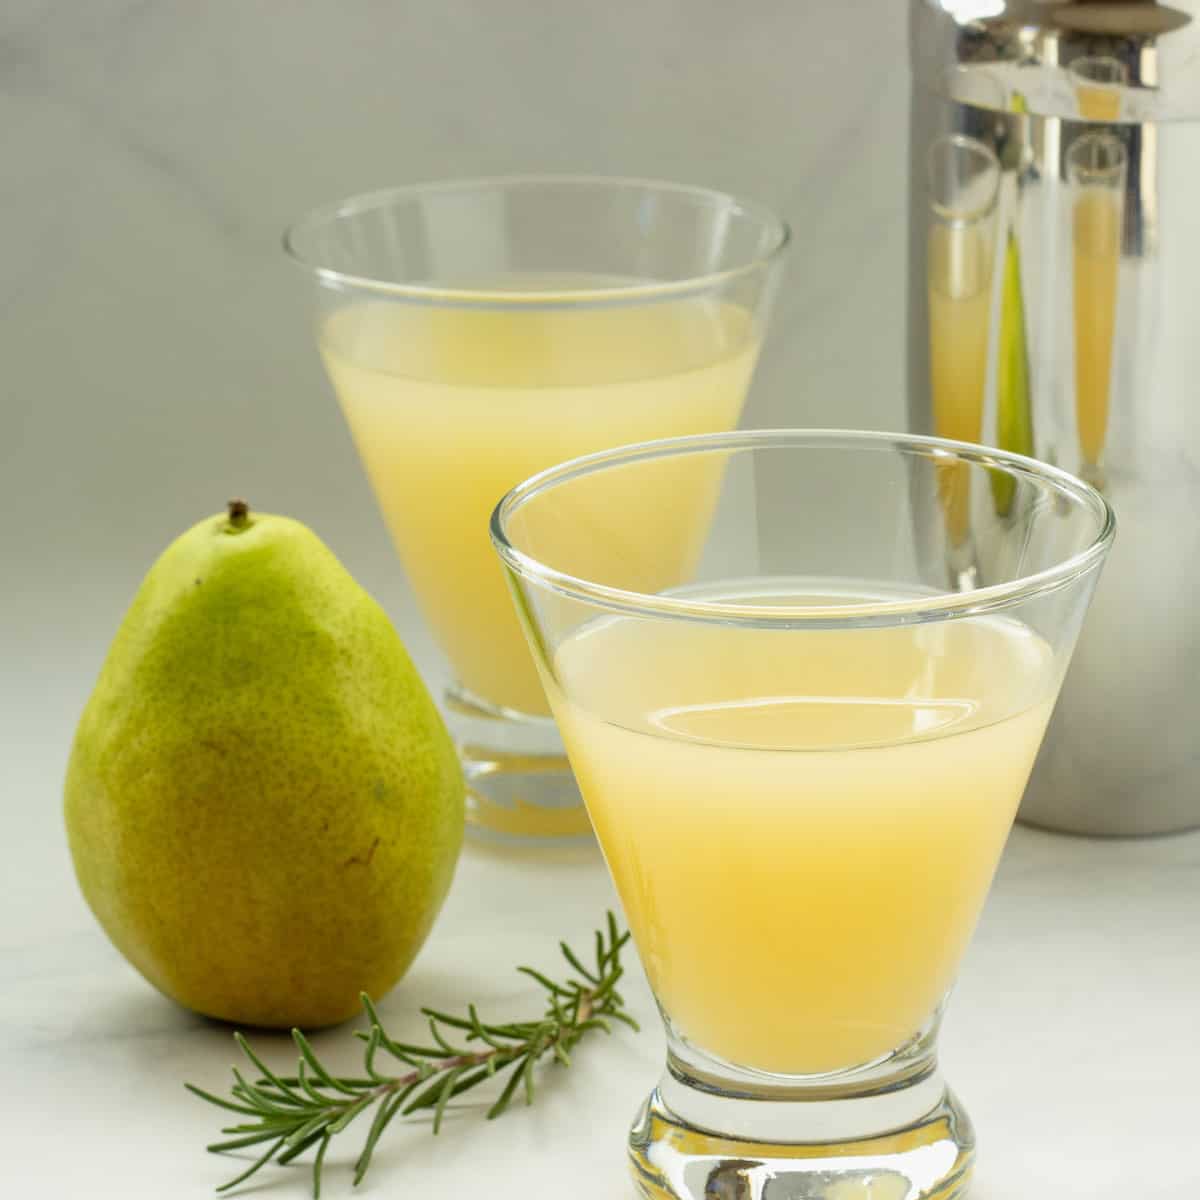 Spiced Pear Martini (with Mocktail Option)